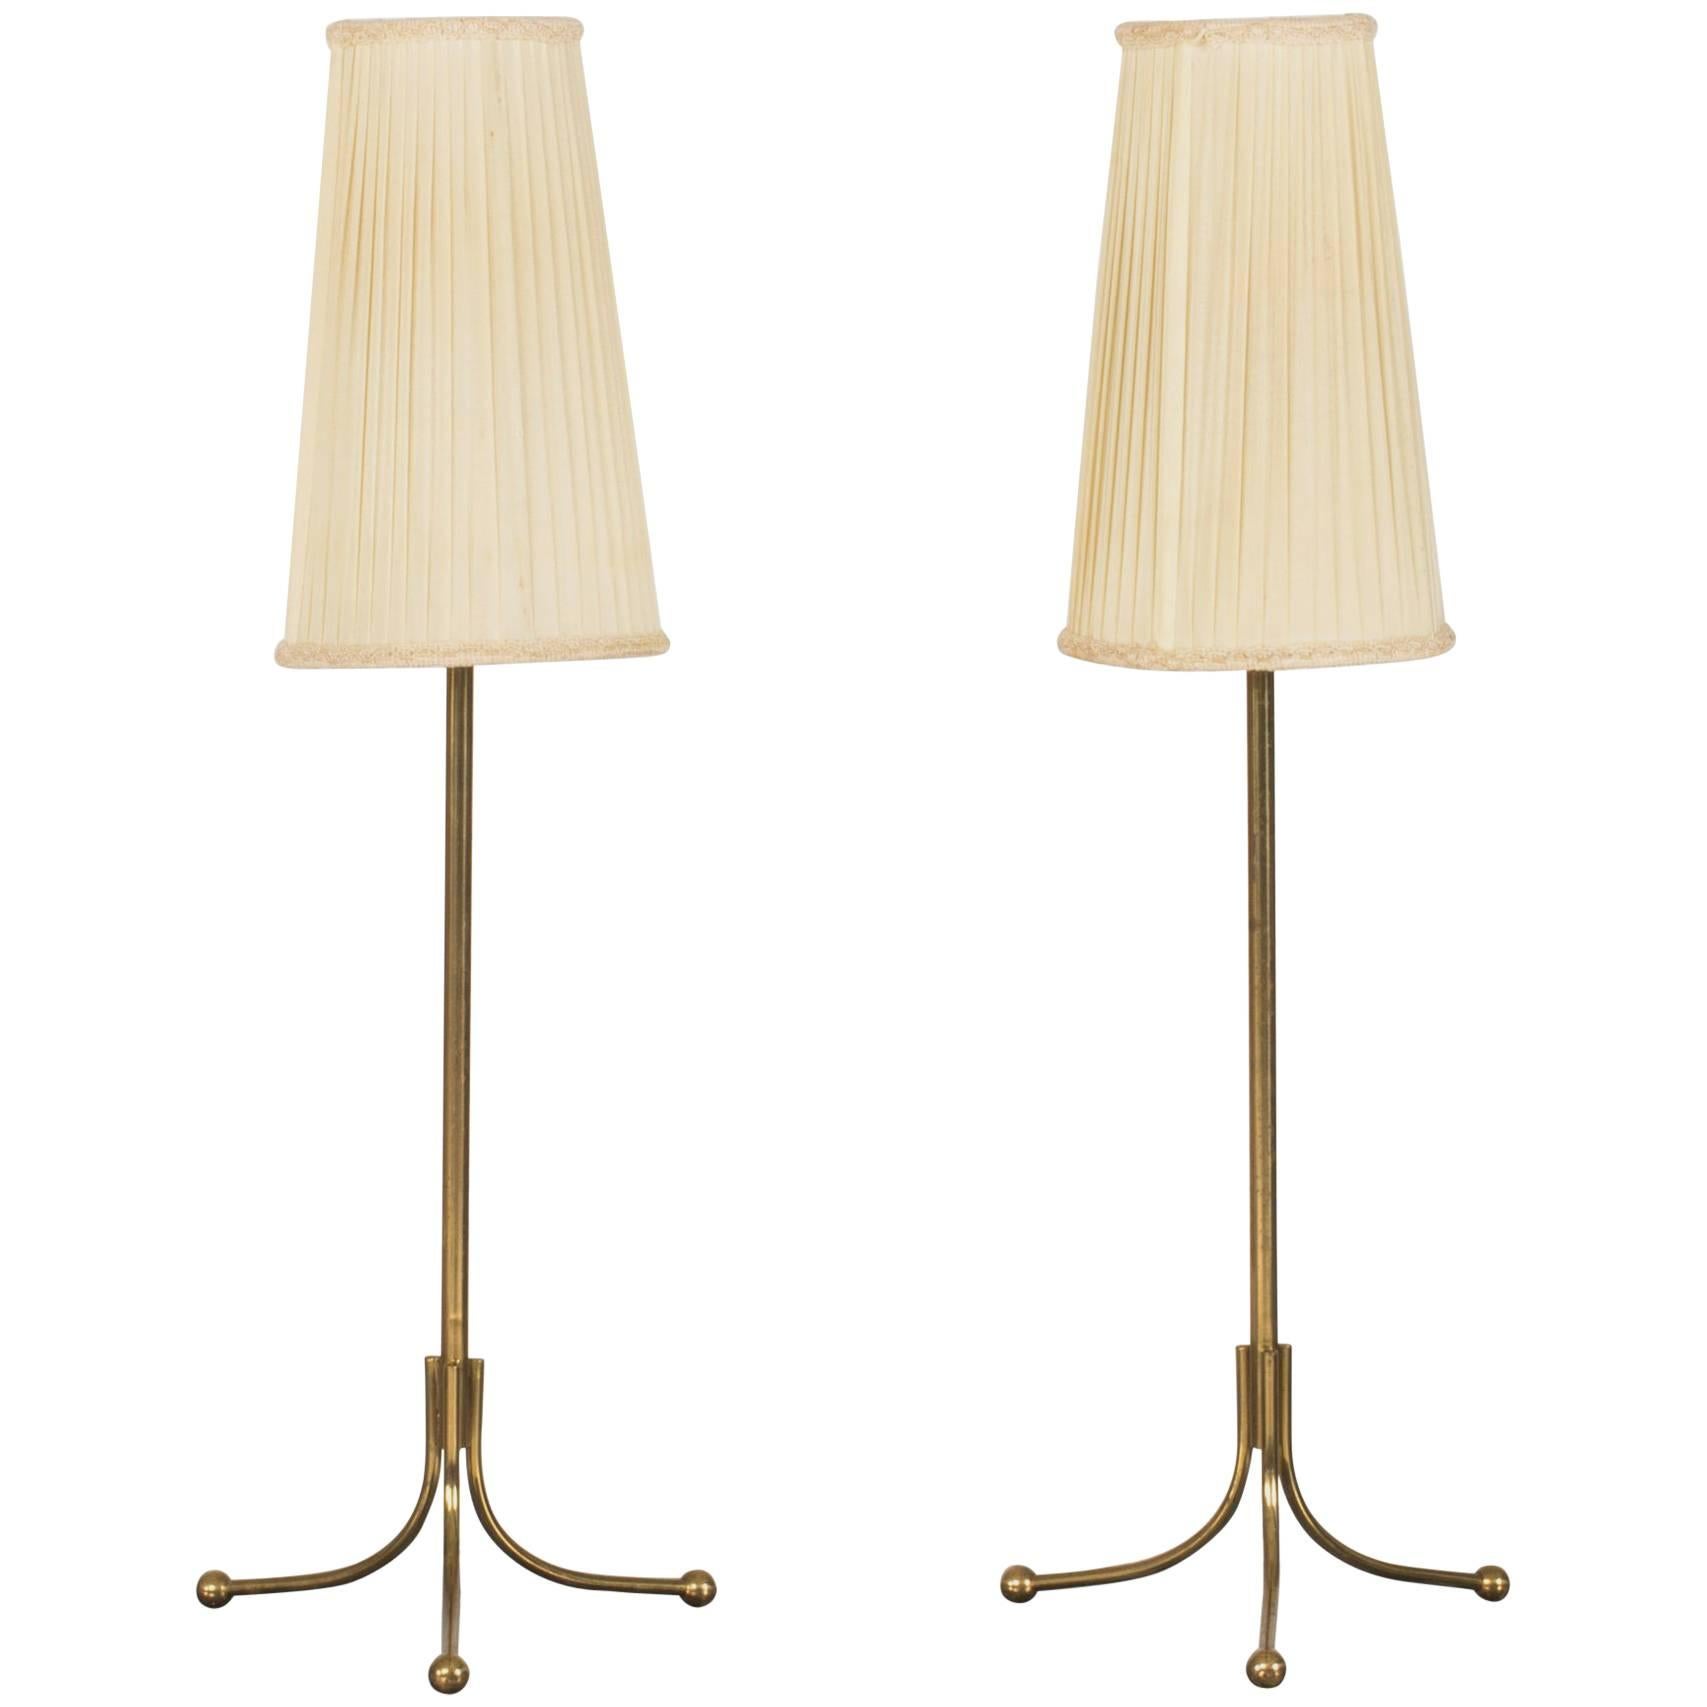 Pair of Brass Table Lamps by Josef Frank